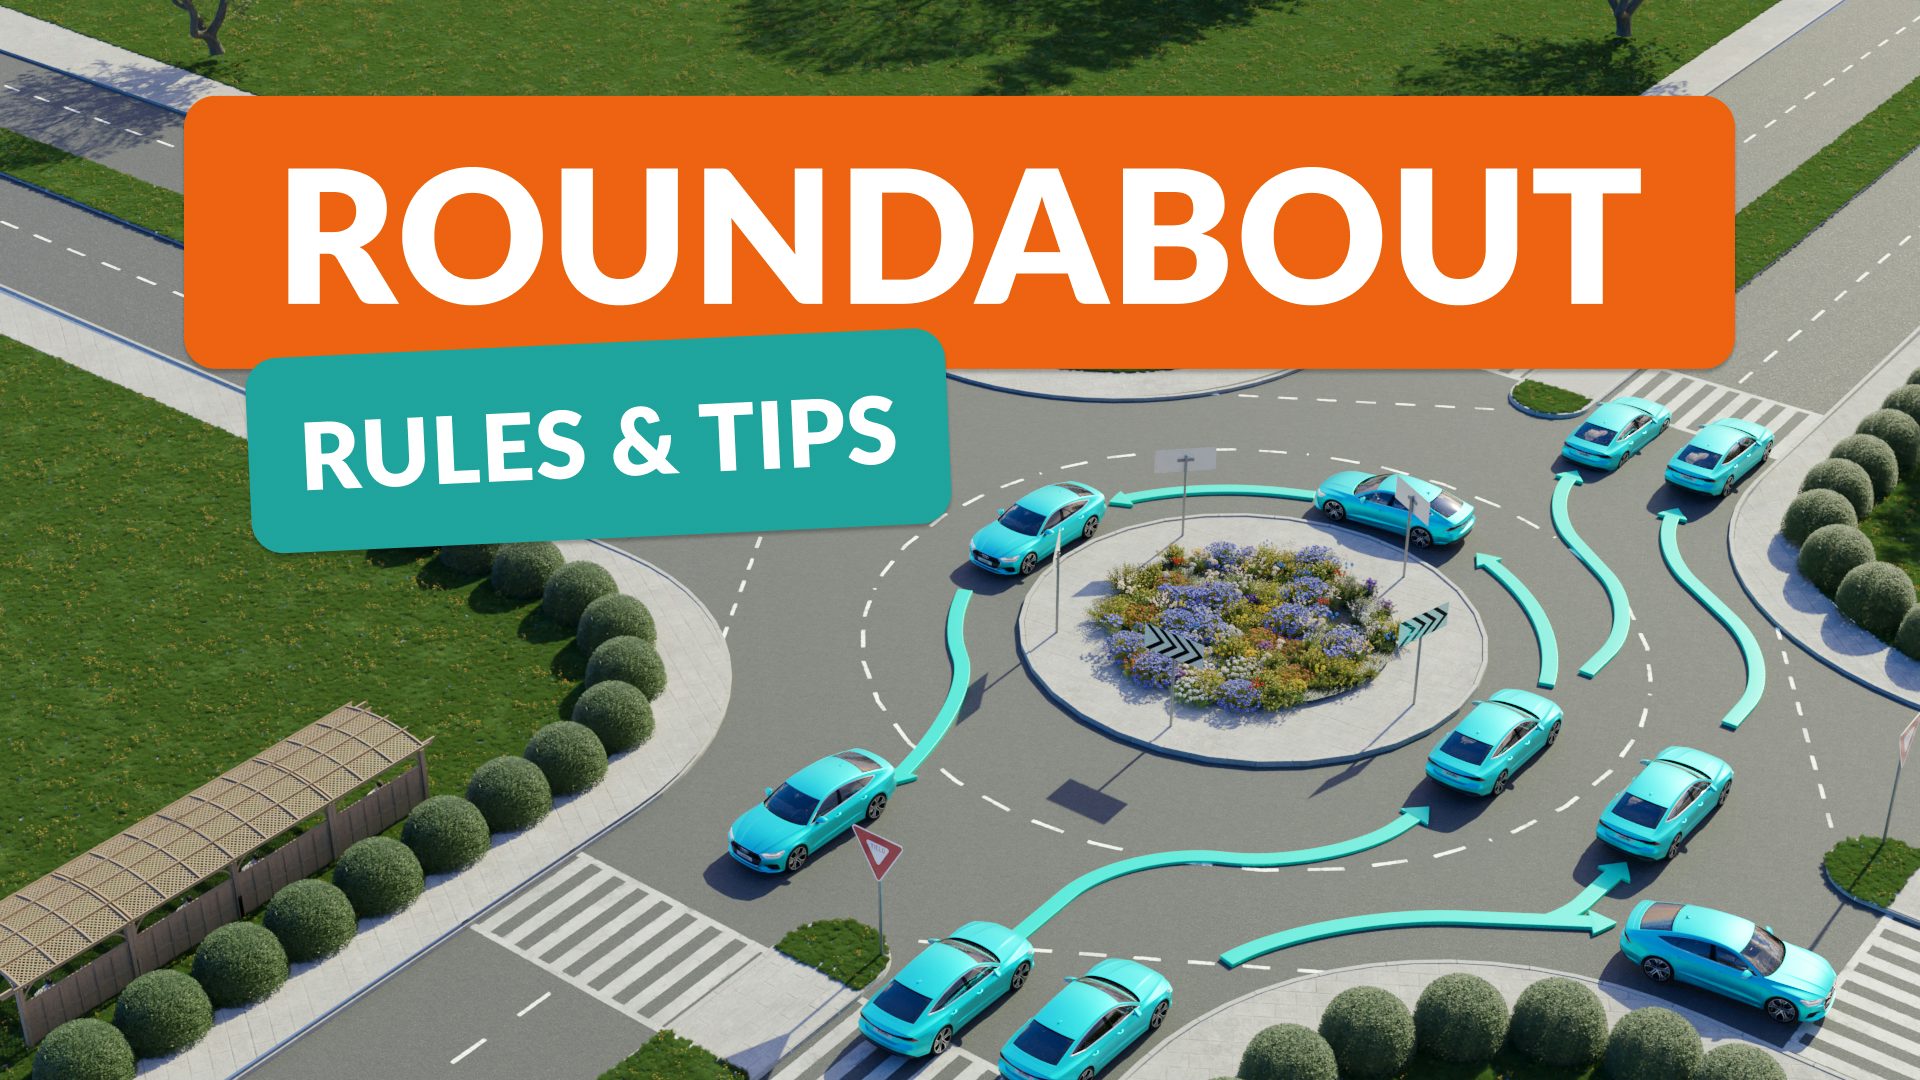 How to use a Roundabout